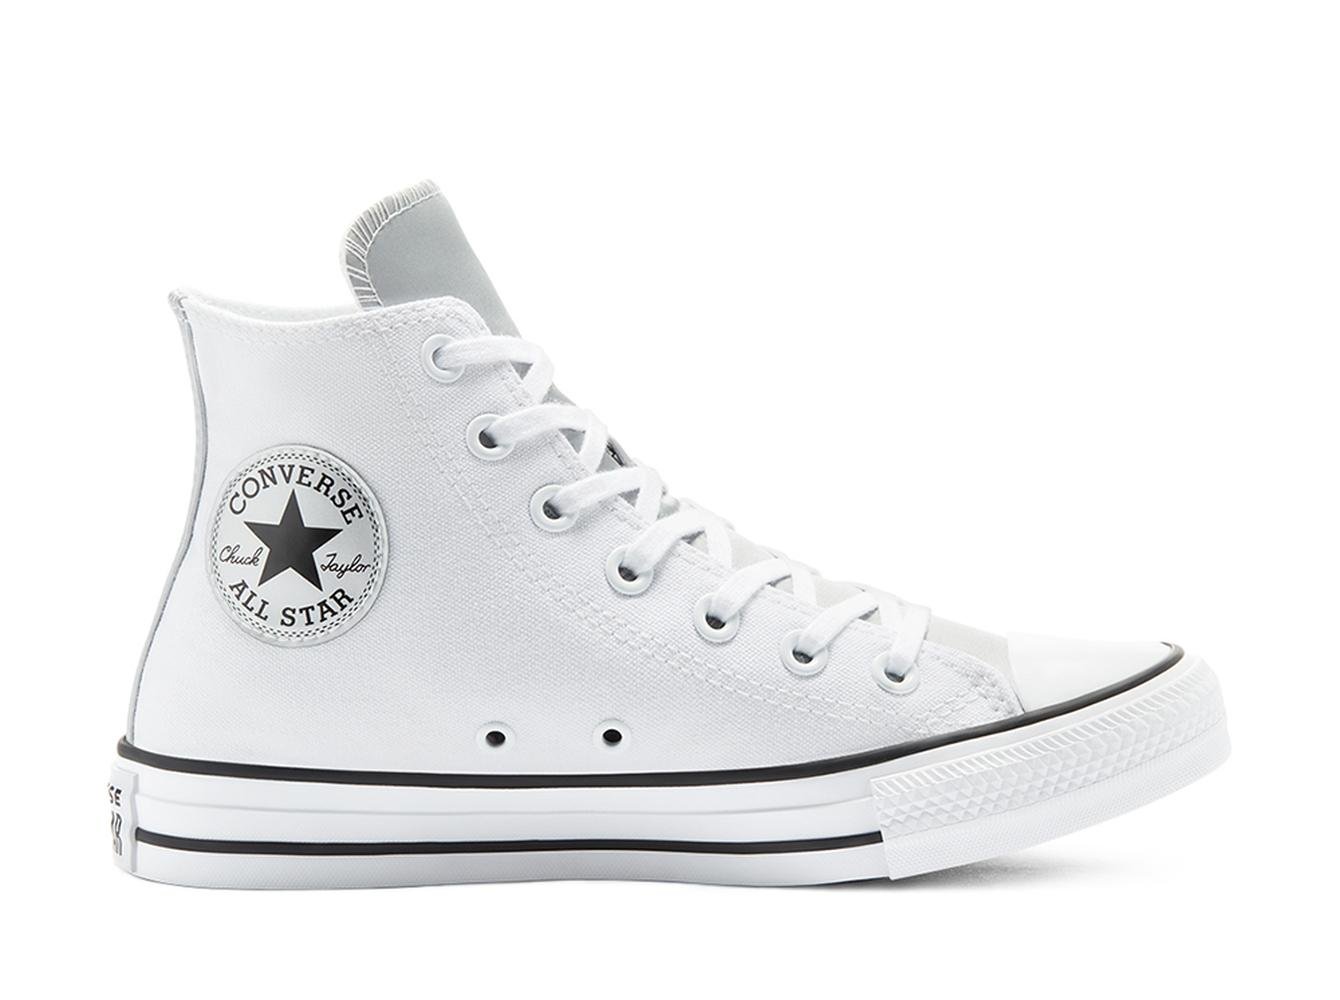 Anodized Metals Chuck Taylor All Star